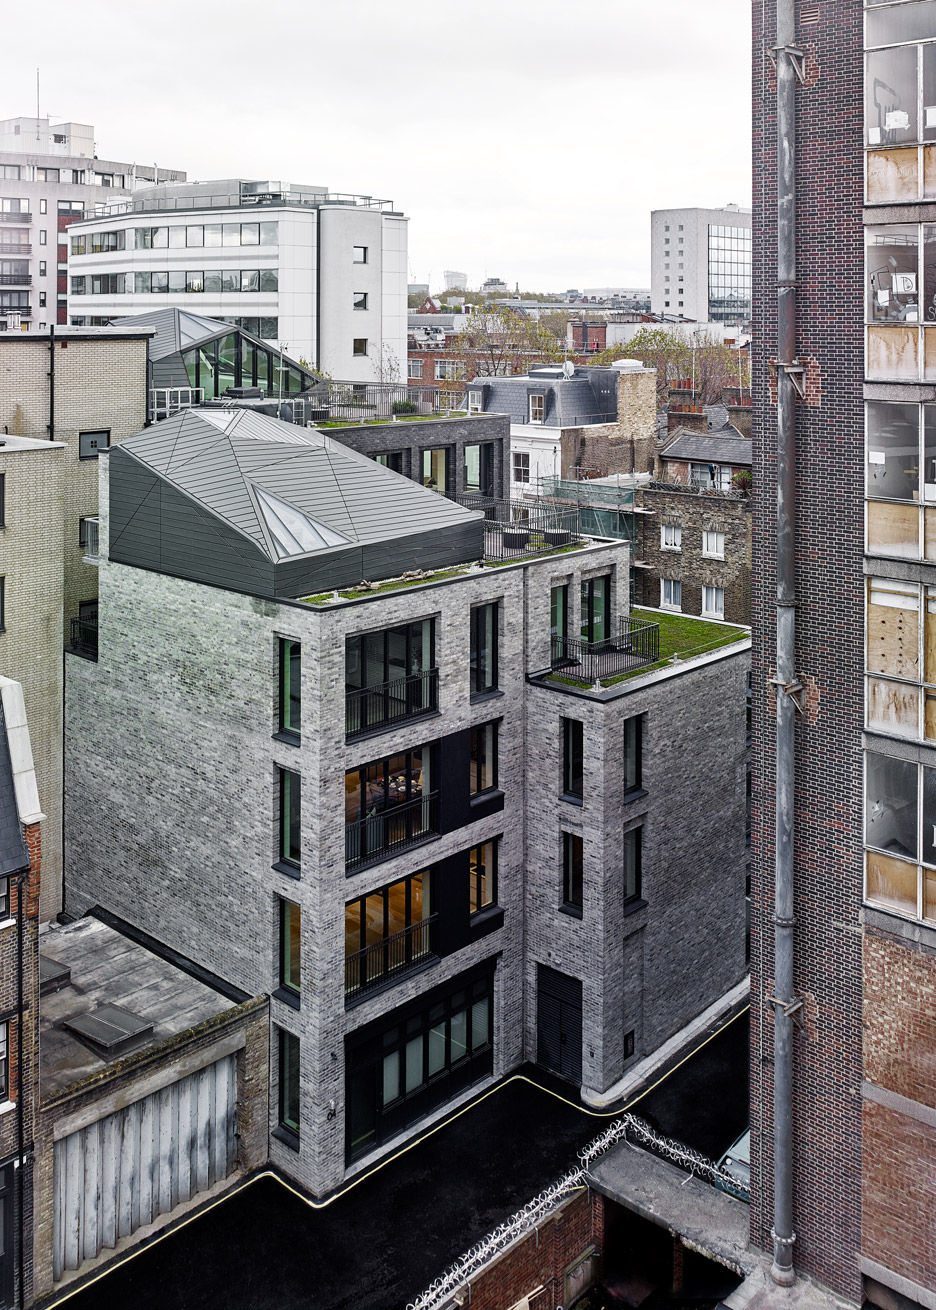 Photograph by Christopher Rudquist Corner House by DSDHA residential mixed-use brick architecture London, UK